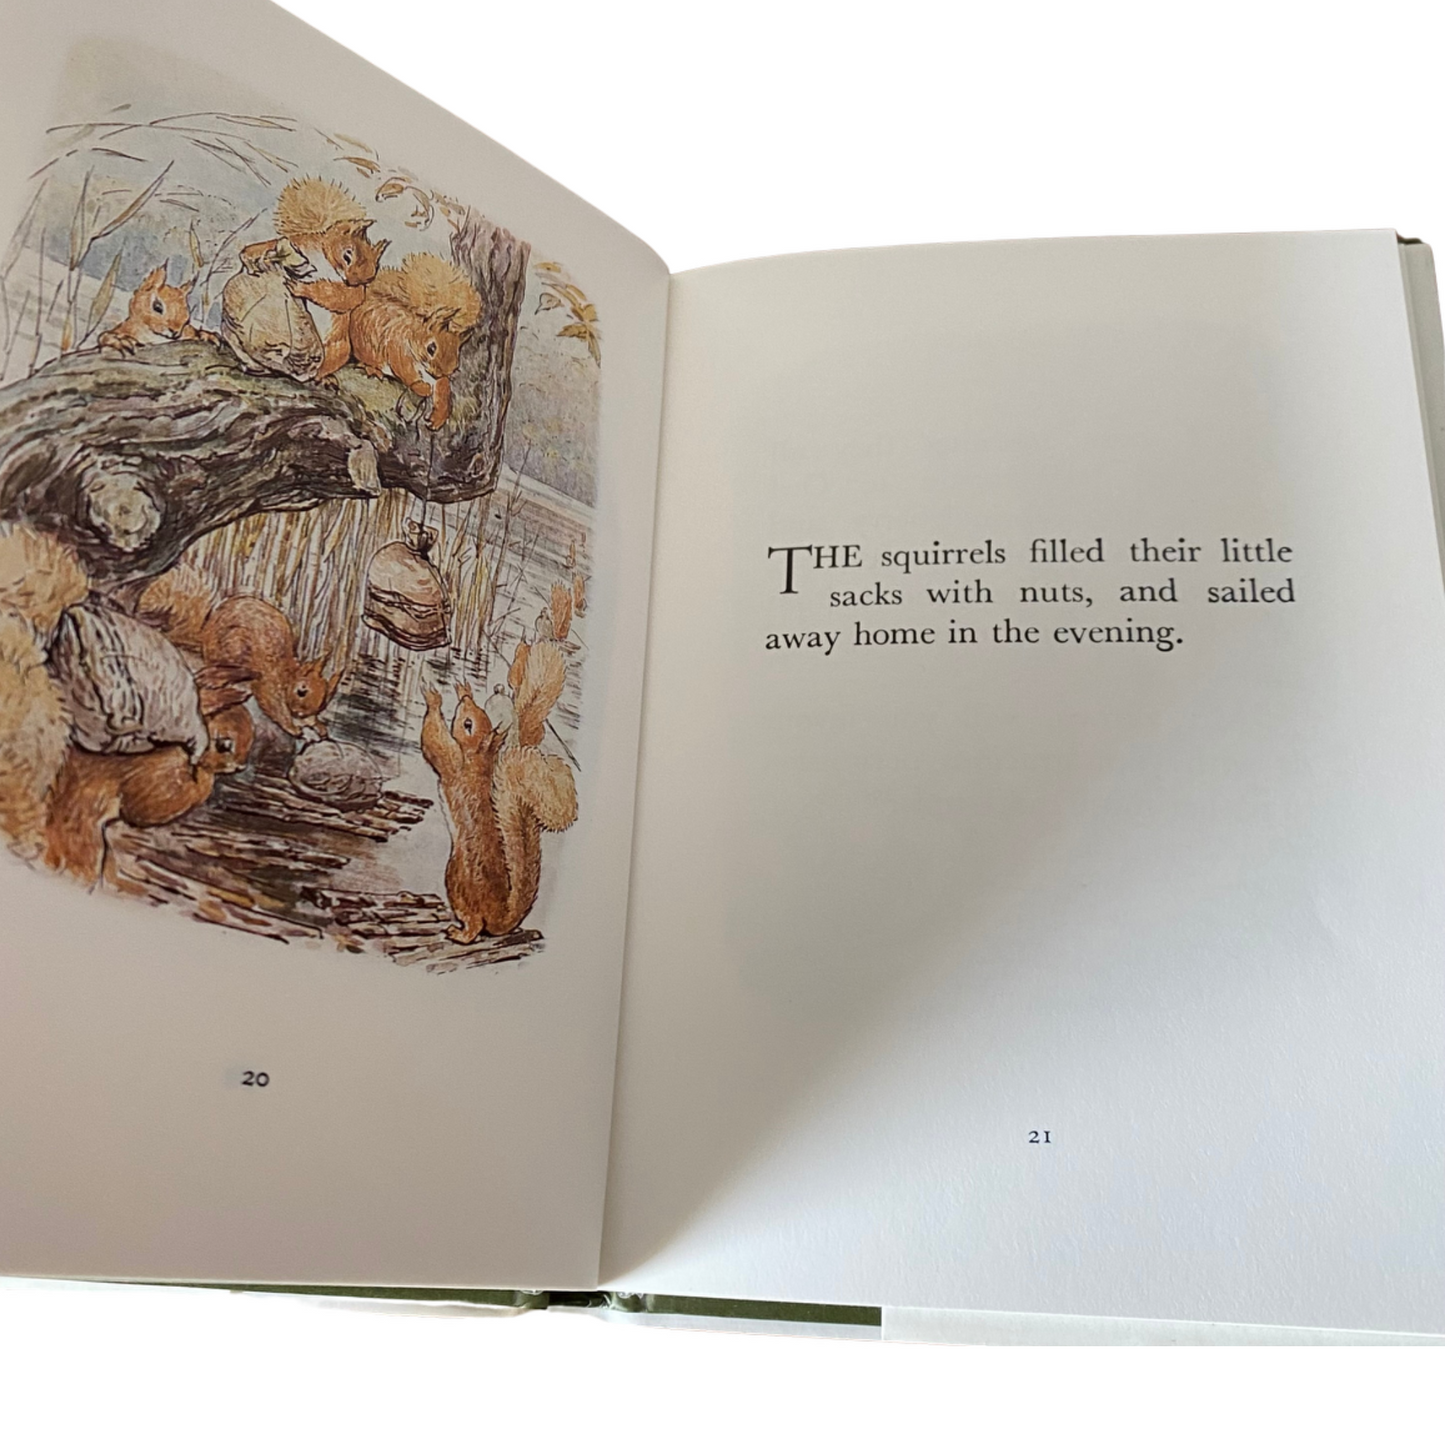 The Tale of Squirrel Nutkin. Vintage Beatrix Potter book. 1987 edition.